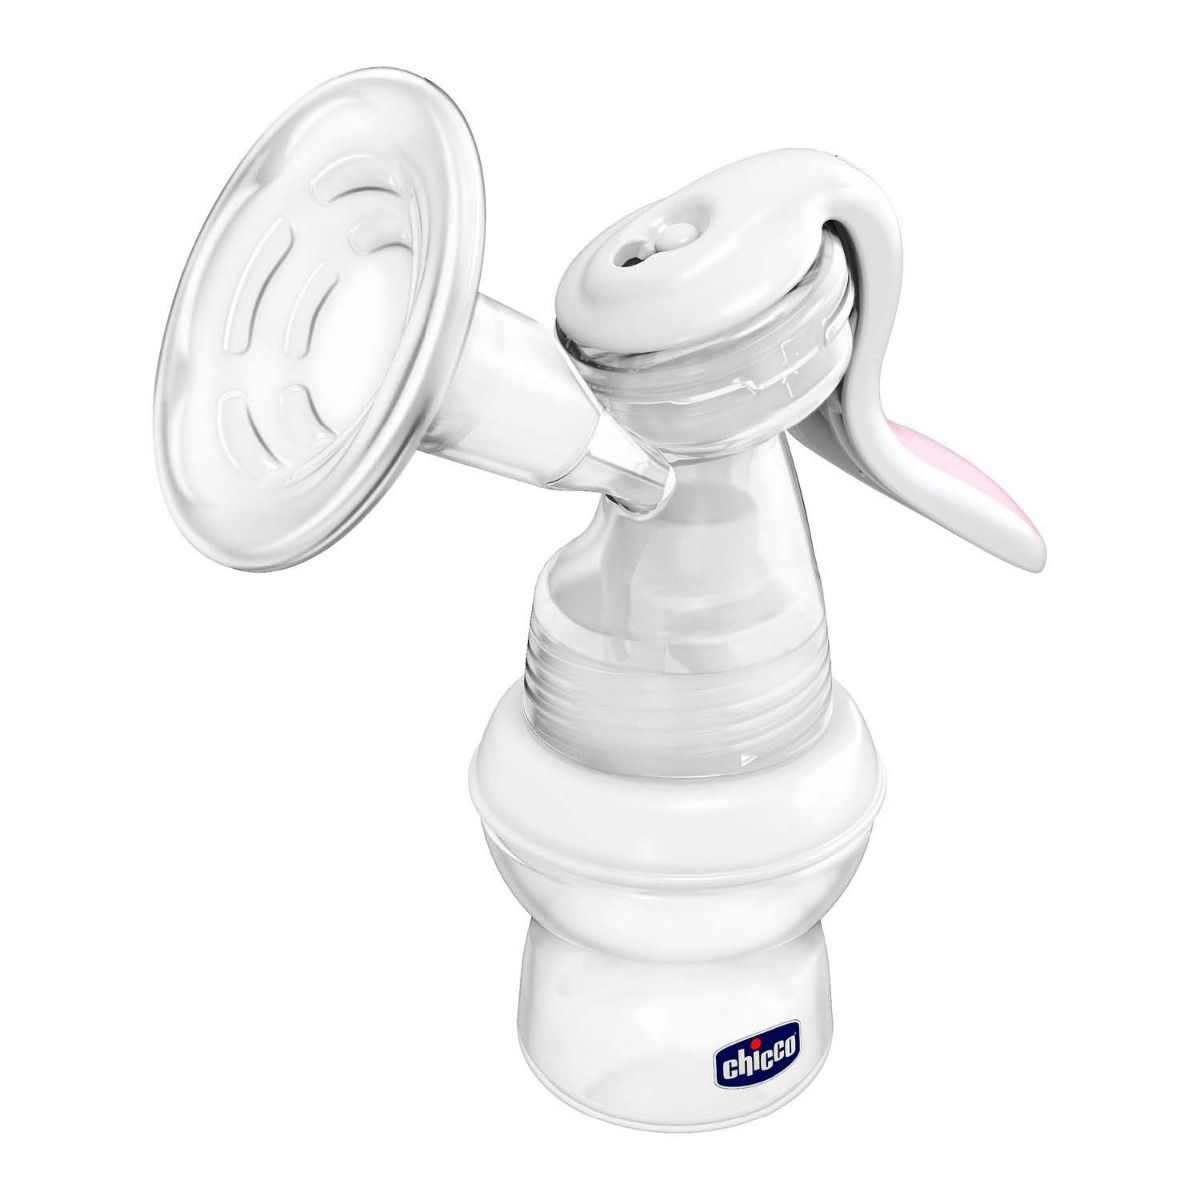 Buy Chicco Natural Feeling Breast Pump, 1 Count Online